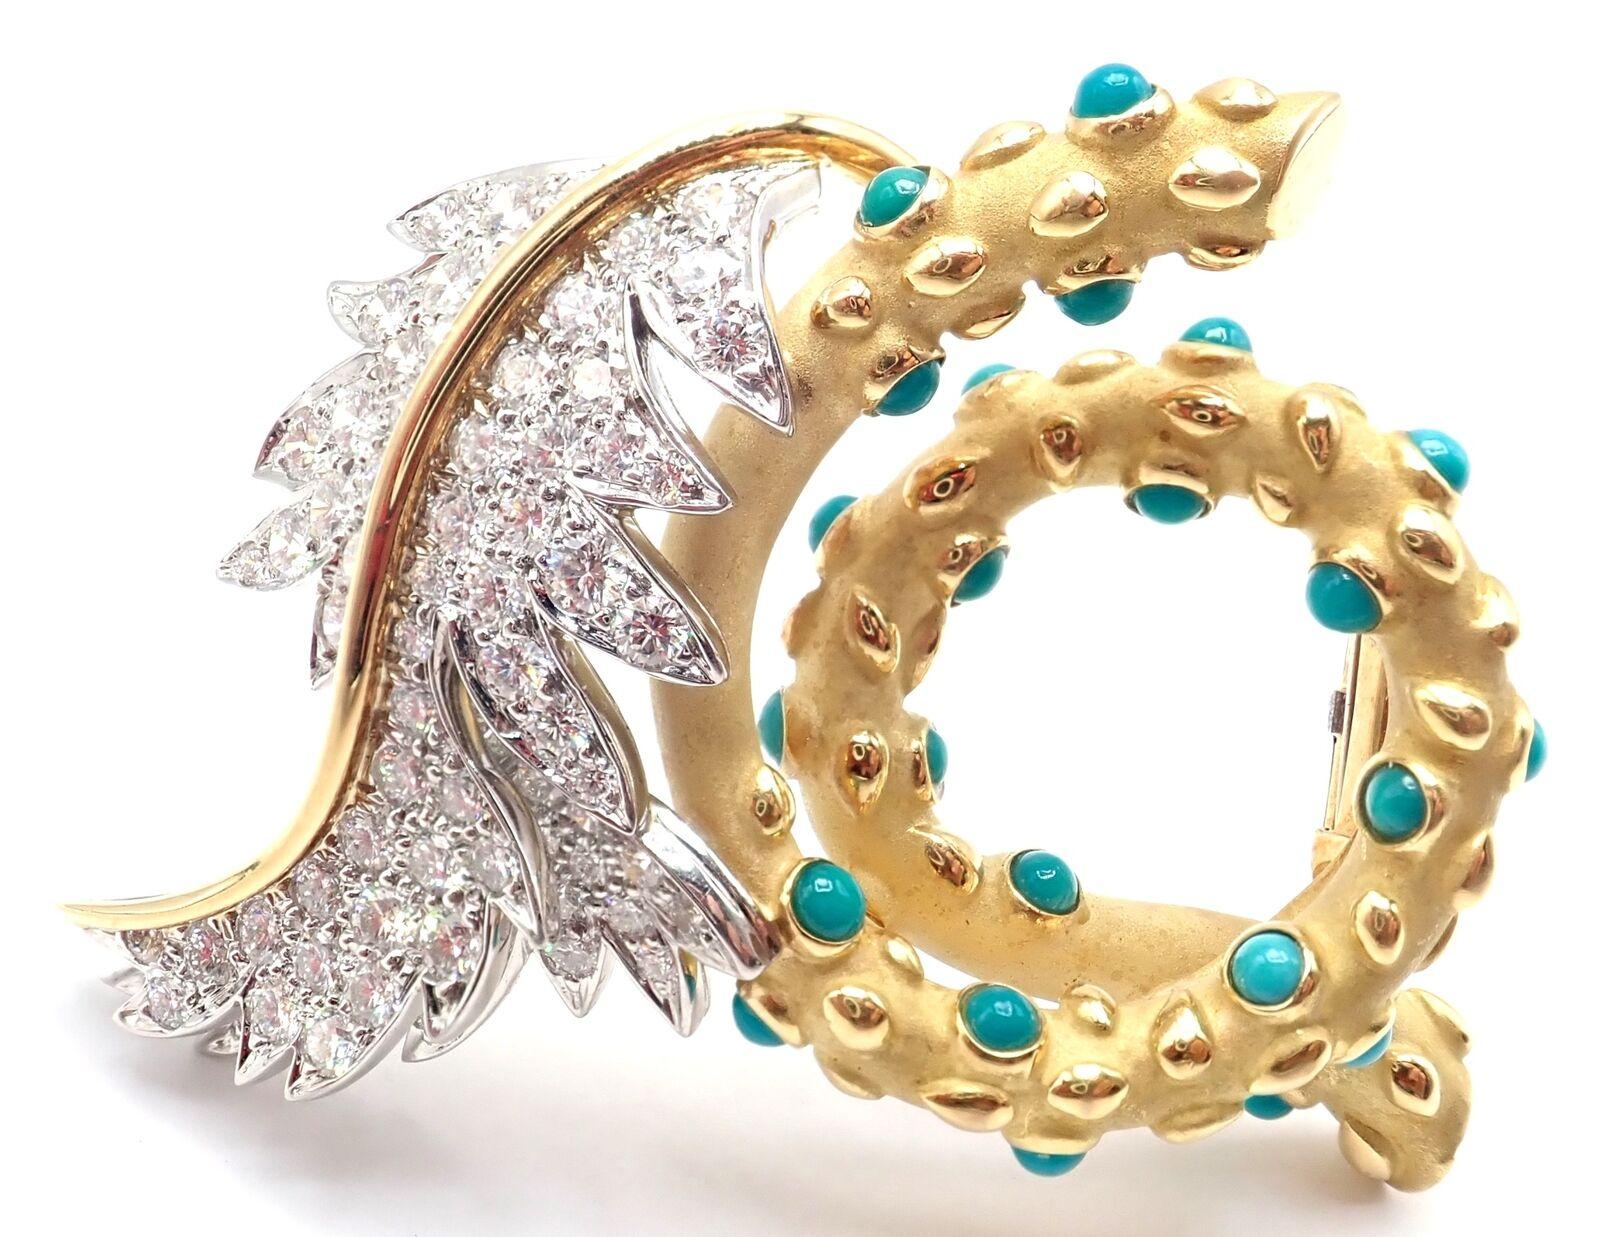 18k Yellow Gold Platinum Diamond And Turquoise Brooch Pin by Jean Schlumberger for Tiffany & Co.
With 78 round brilliant cut diamonds VS1 clarity, G color total weight approximately 3.23ct
21 round turquoise stones
This brooch comes with Tiffany &